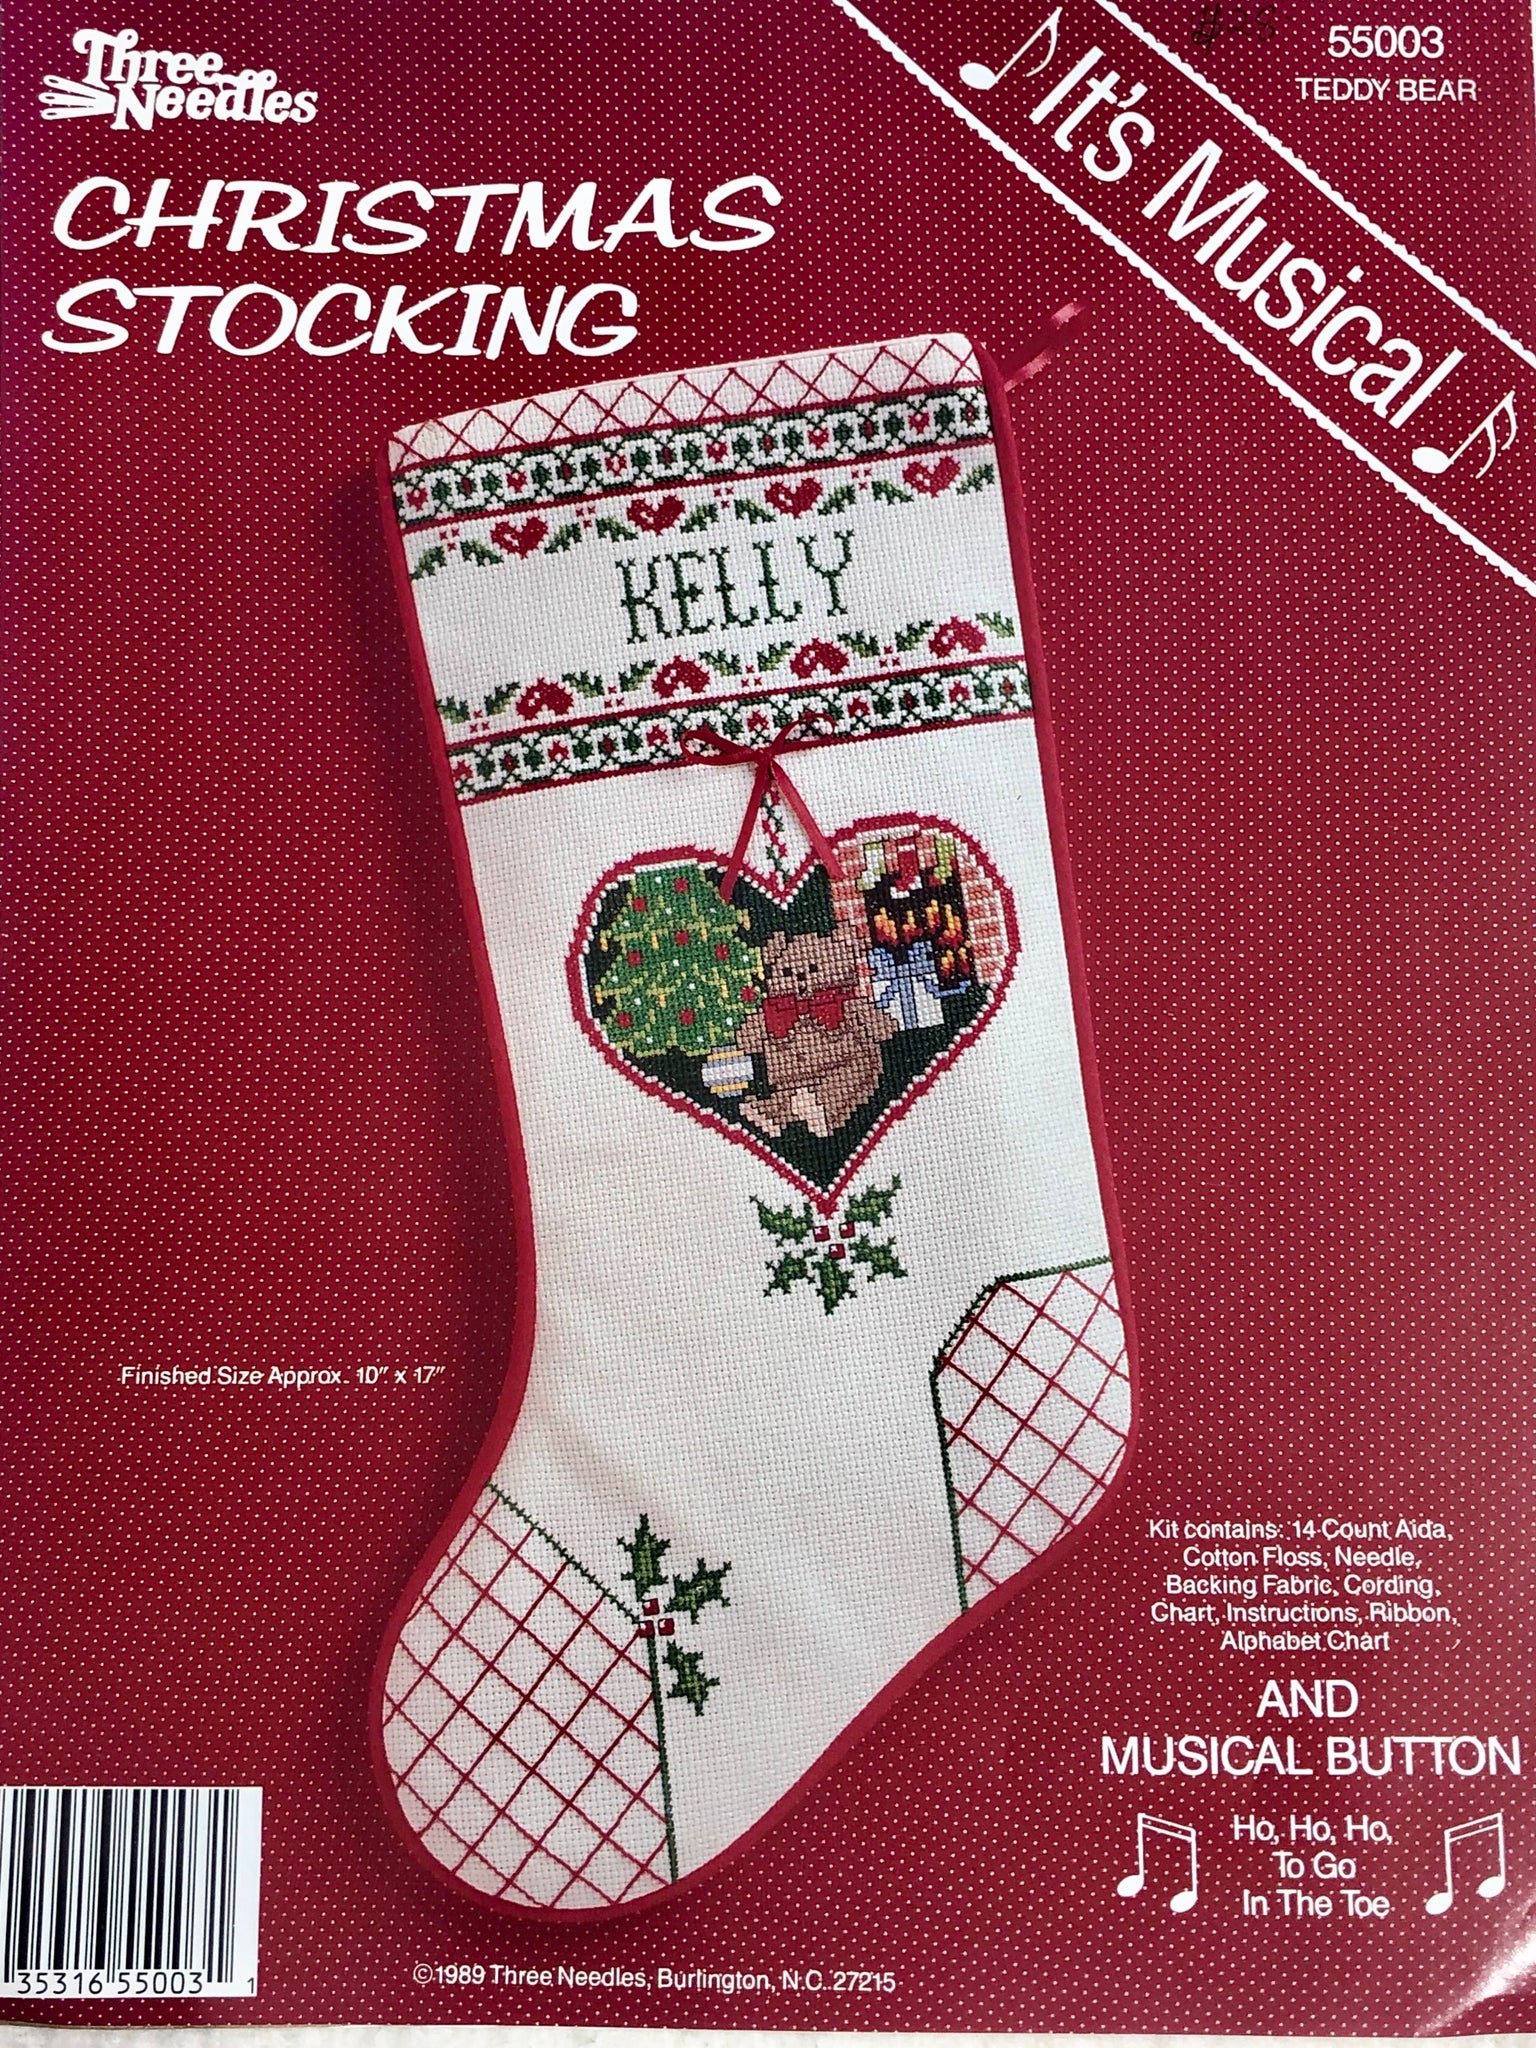 Teddy Bear Stocking Kit with musical button